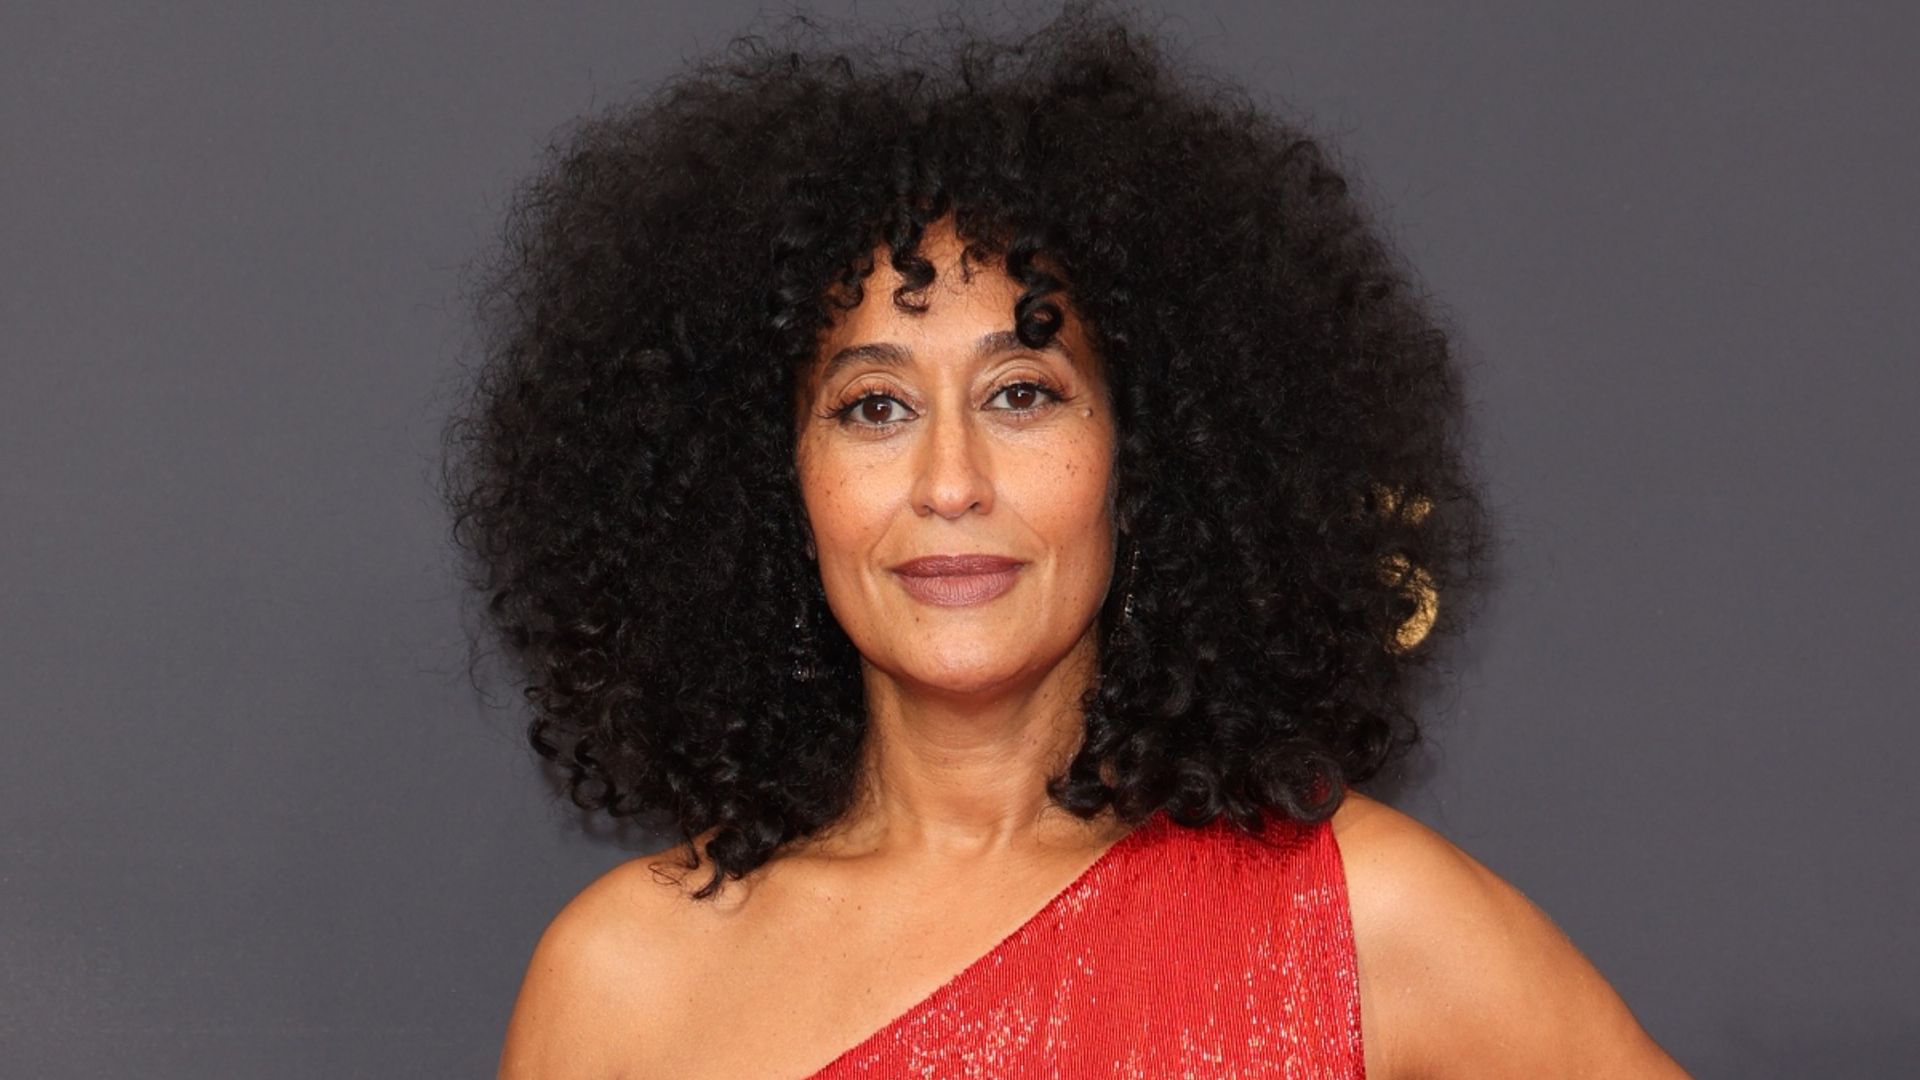 Tracee Ellis Ross has fans all saying one thing with sensational throwback